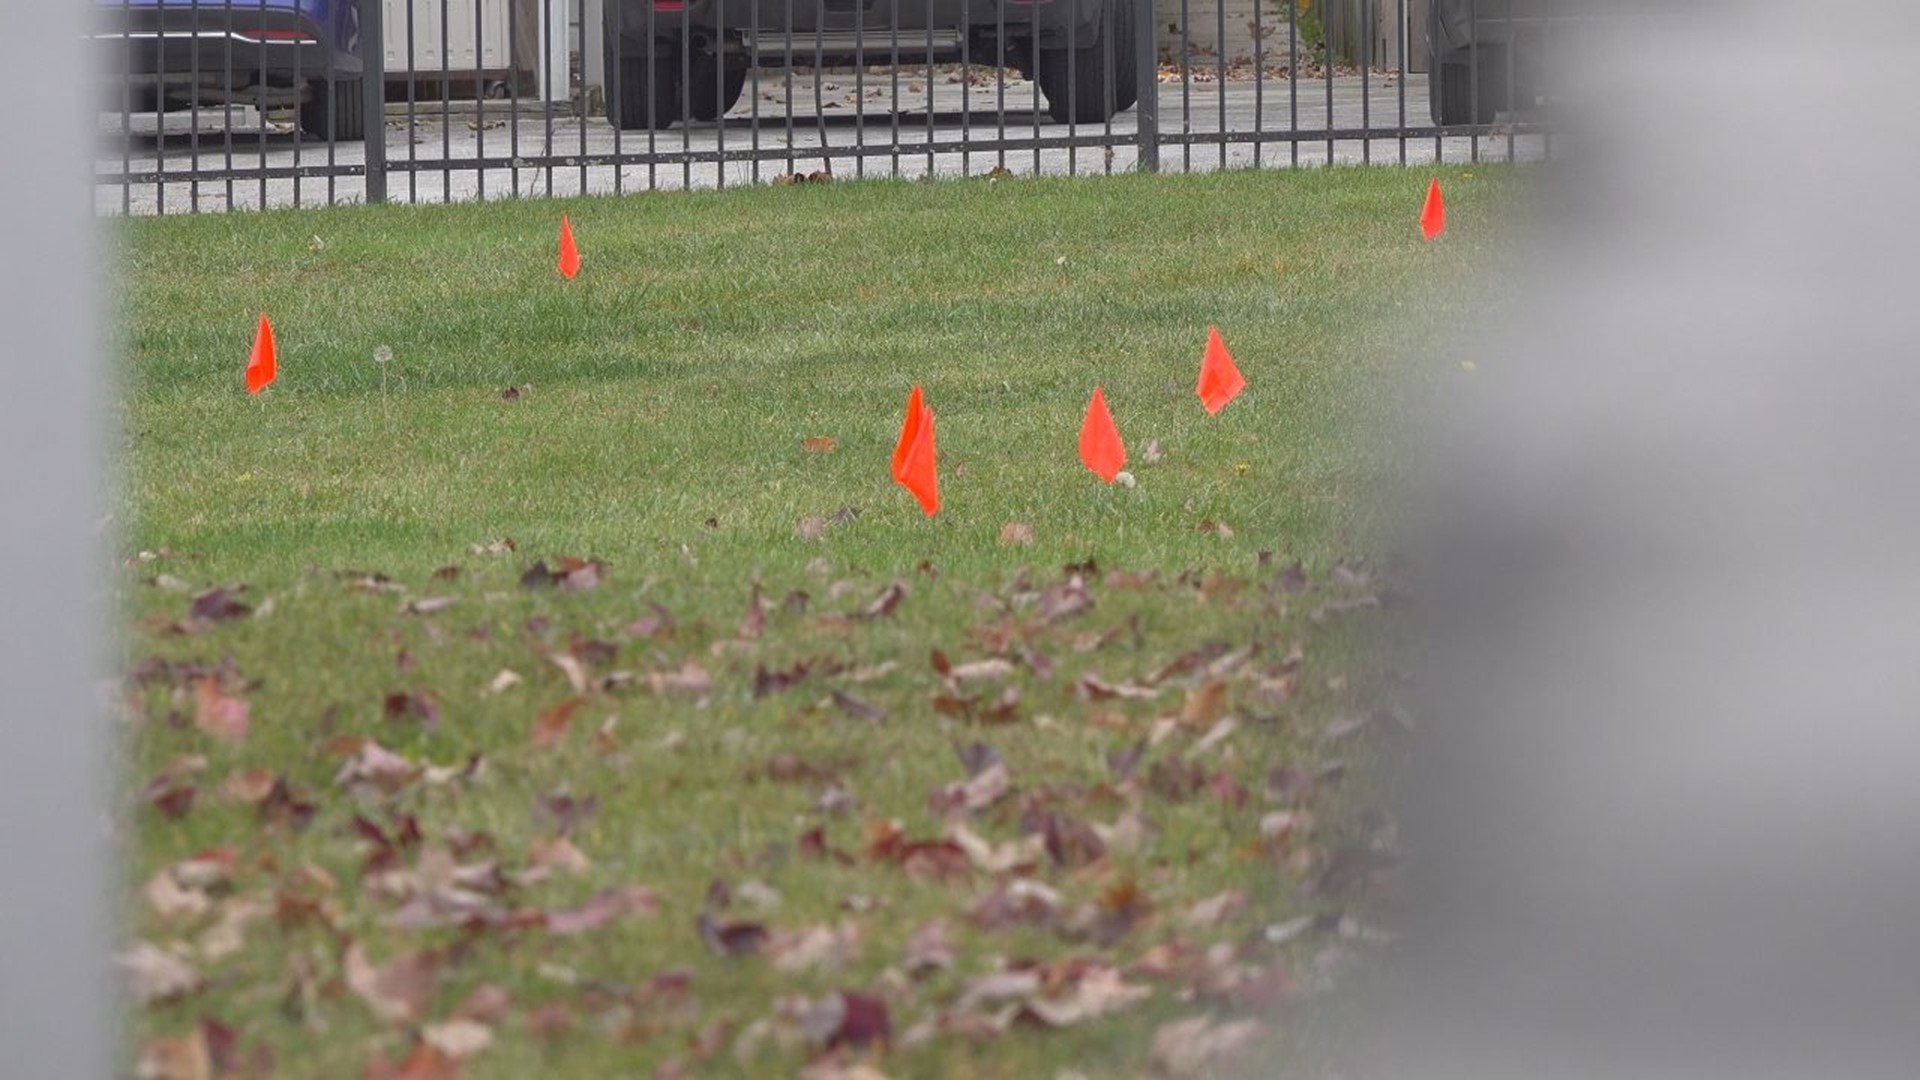 The Lincoln Cemetery Project Association, with the help of ground penetrating radar, recently discovered 136 unmarked graves.